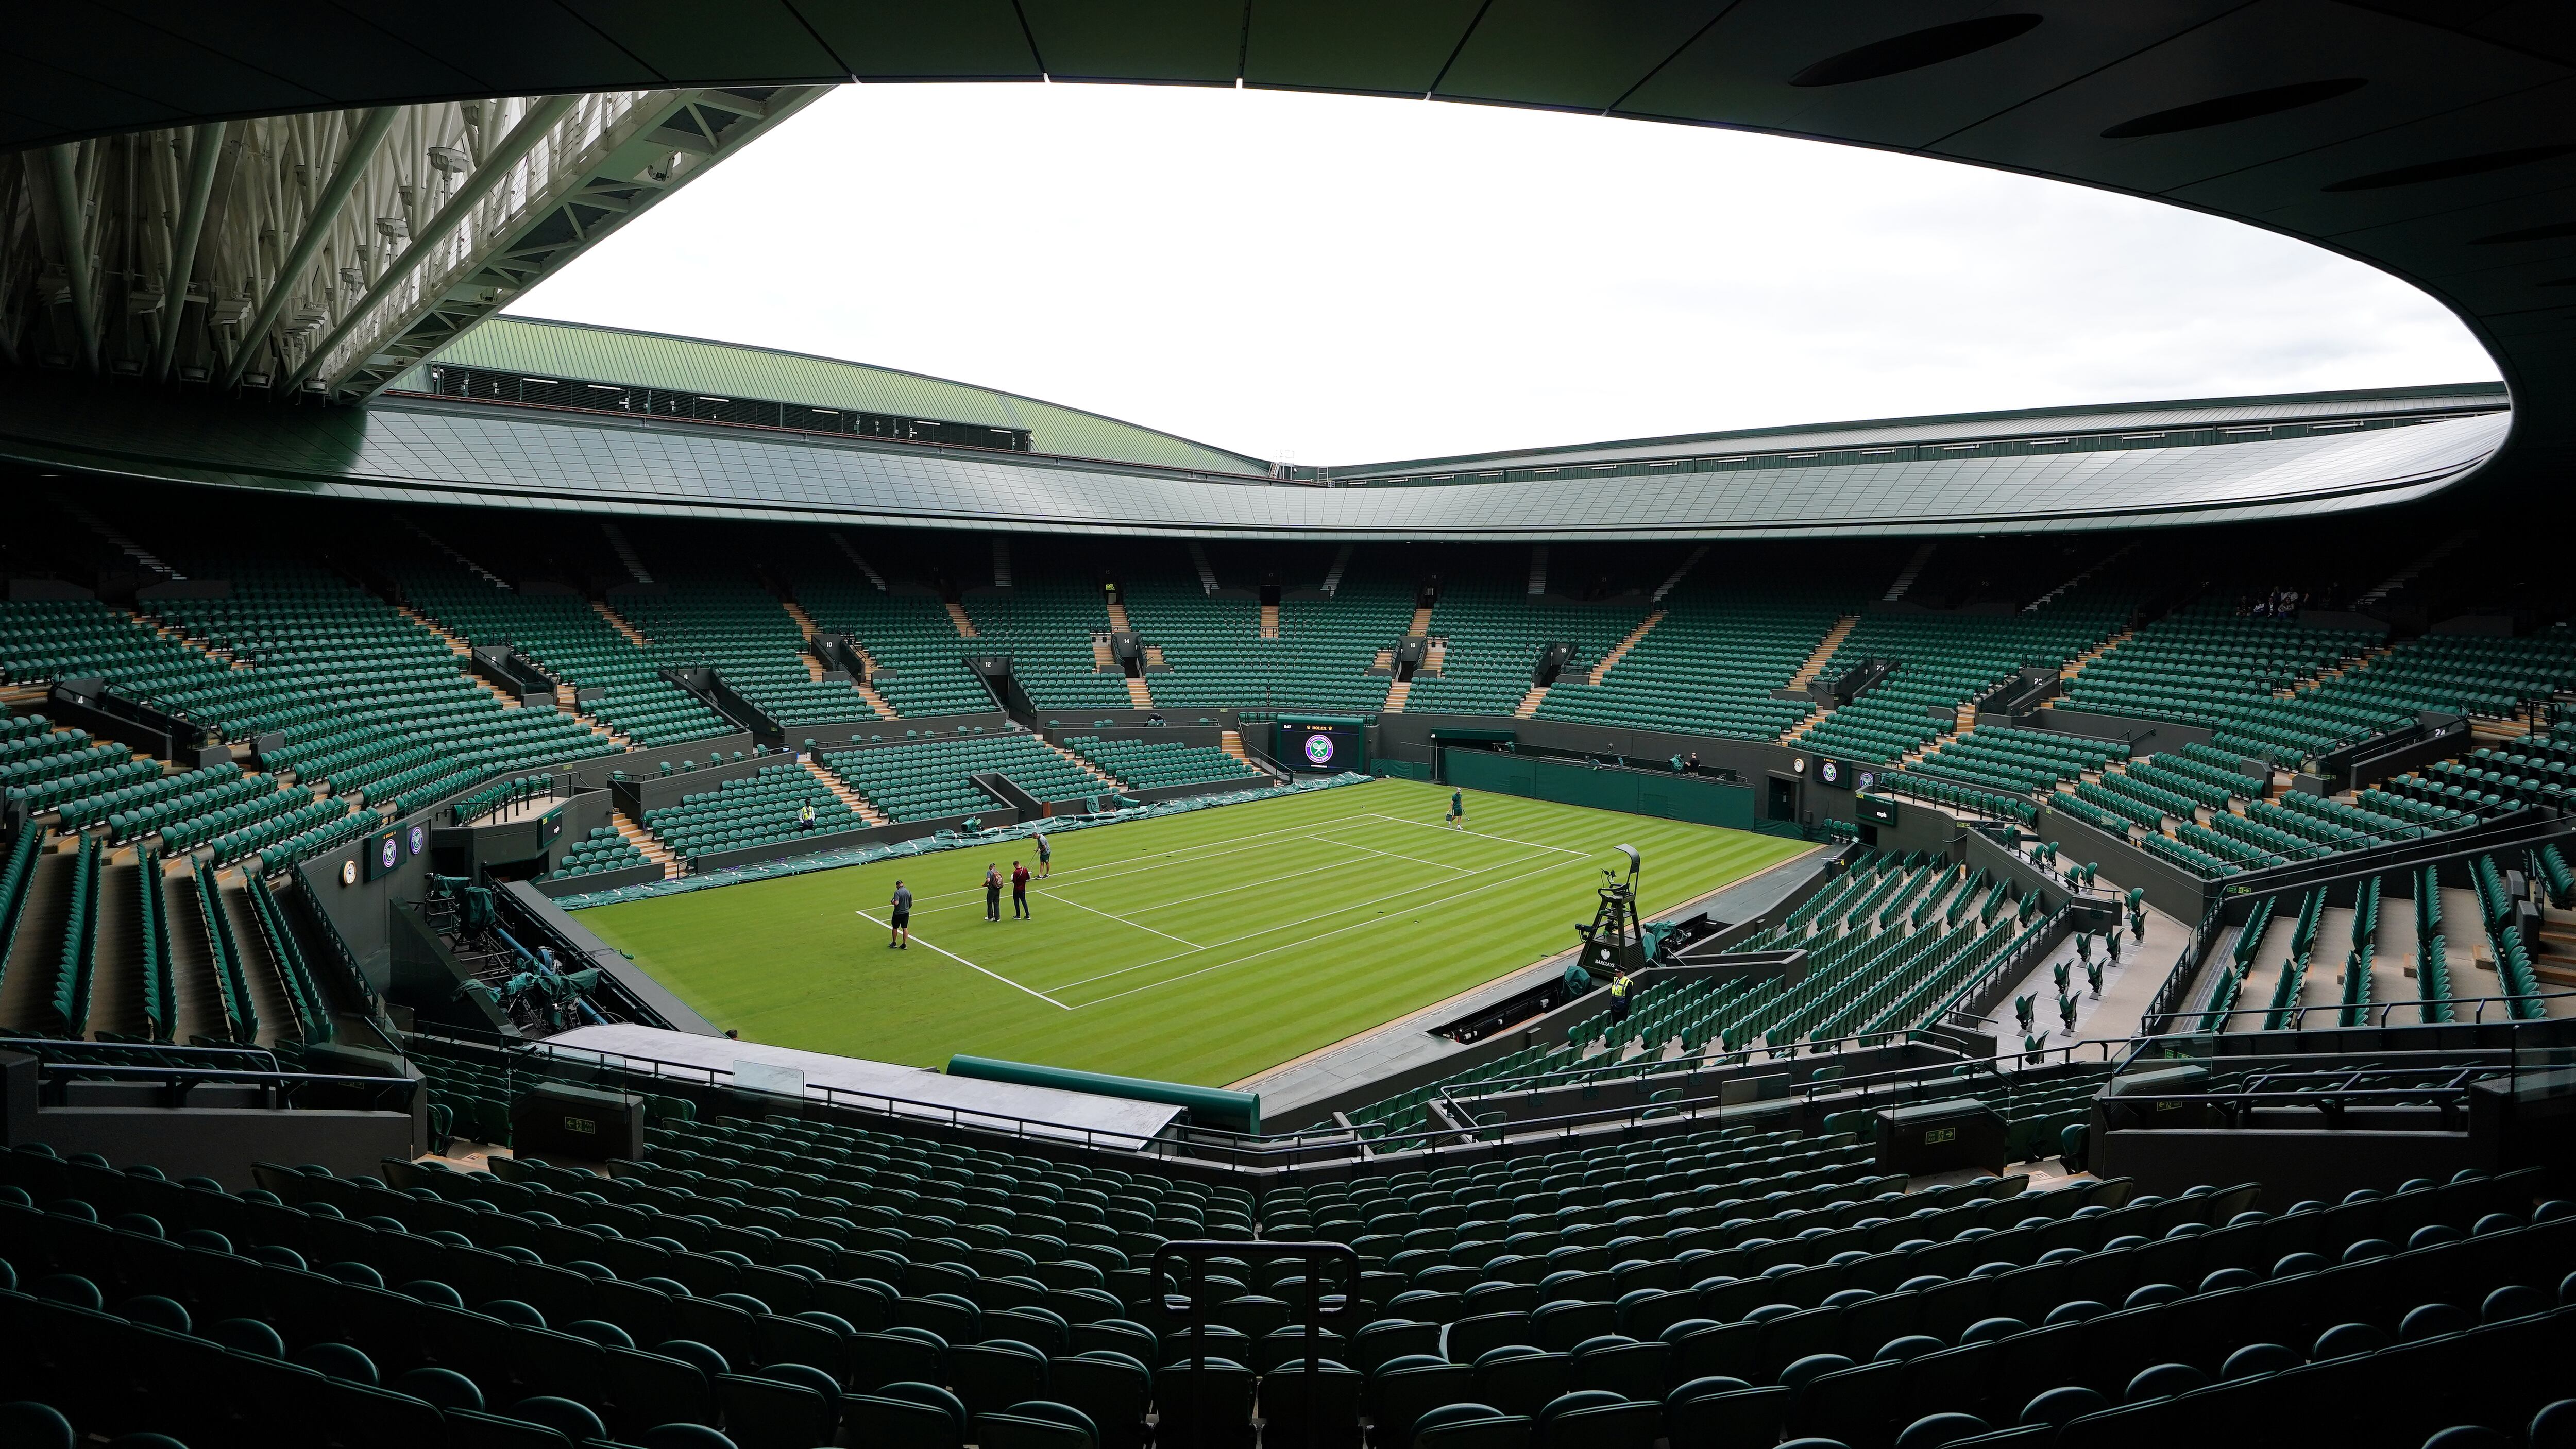 Sunny spells could be broken by showers during the opening week of Wimbledon